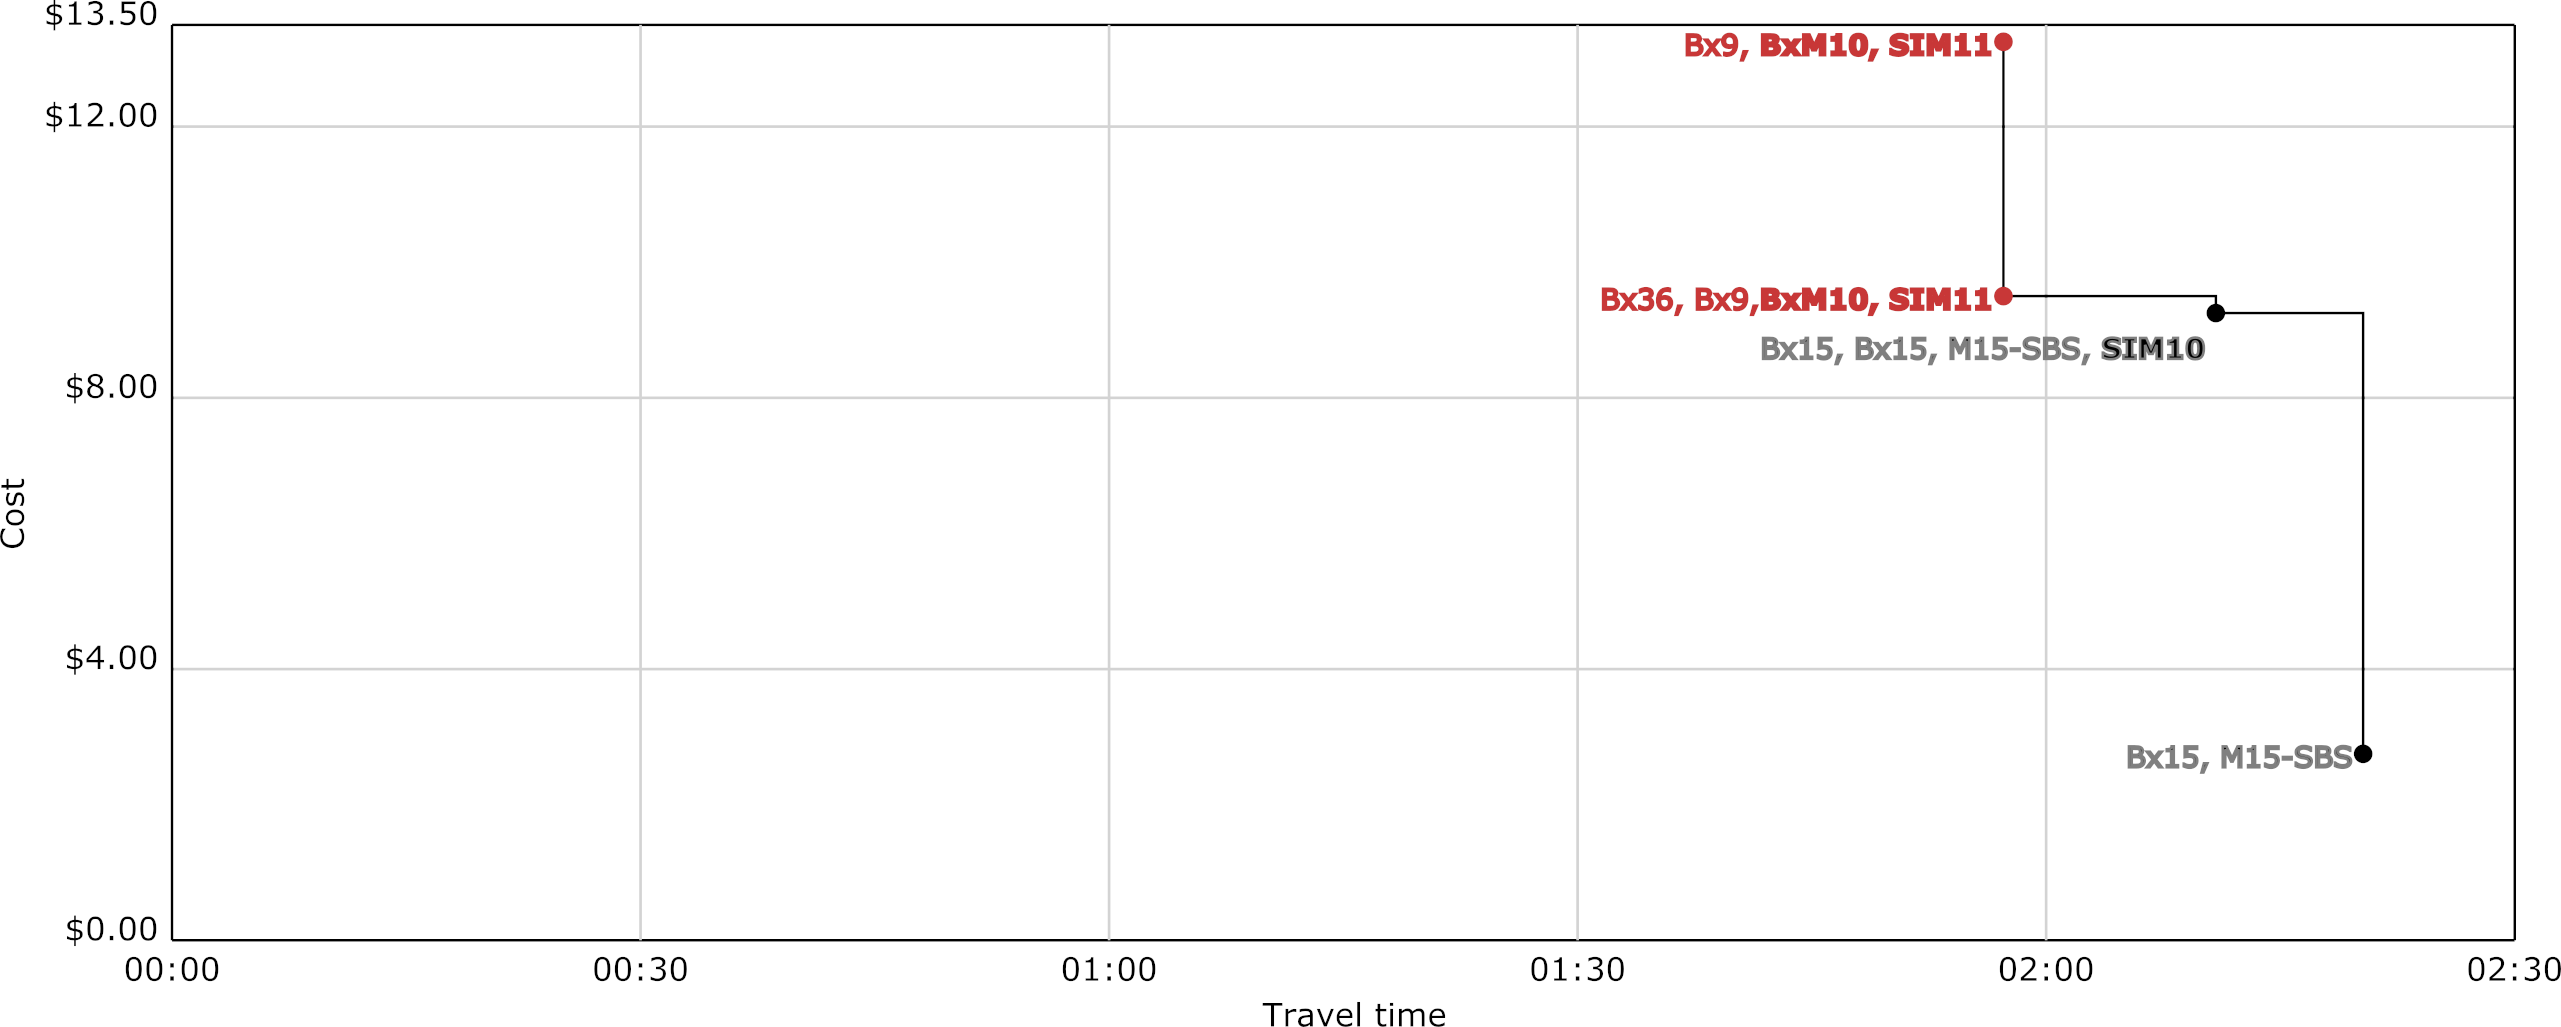 Tradeoff surface showing options for travel by bus from 3rd Ave and E 180th St in the Bronx to Lower Manhattan. Two options are tied for fastest, 1:57, with a $13.25 option consisting of a local bus and two express buses (Bx9, BxM10, SIM111), and a $9.25 option consisting of two local buses and two express buses (Bx36, Bx9, BxM10, SIM111)